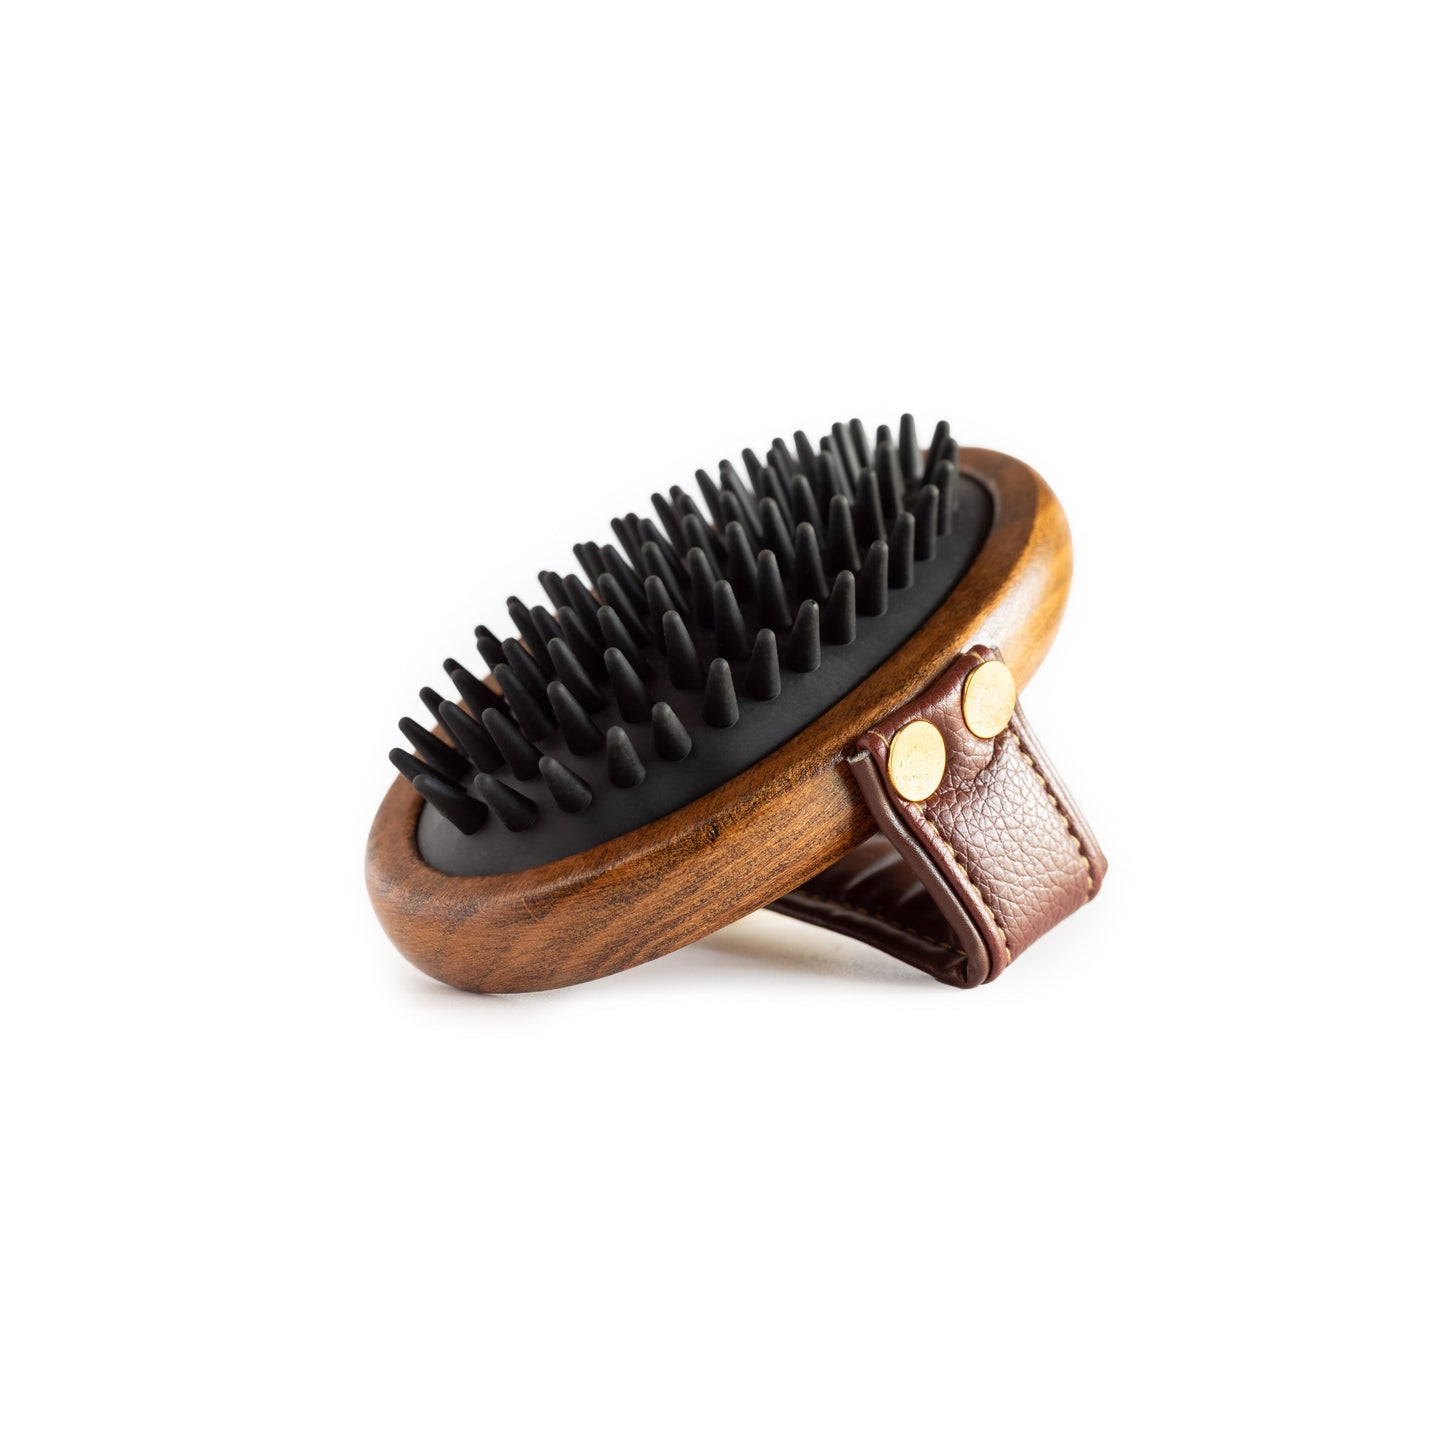 The Hairy Pony Rubber Brush, showing the rubber bristles underside.